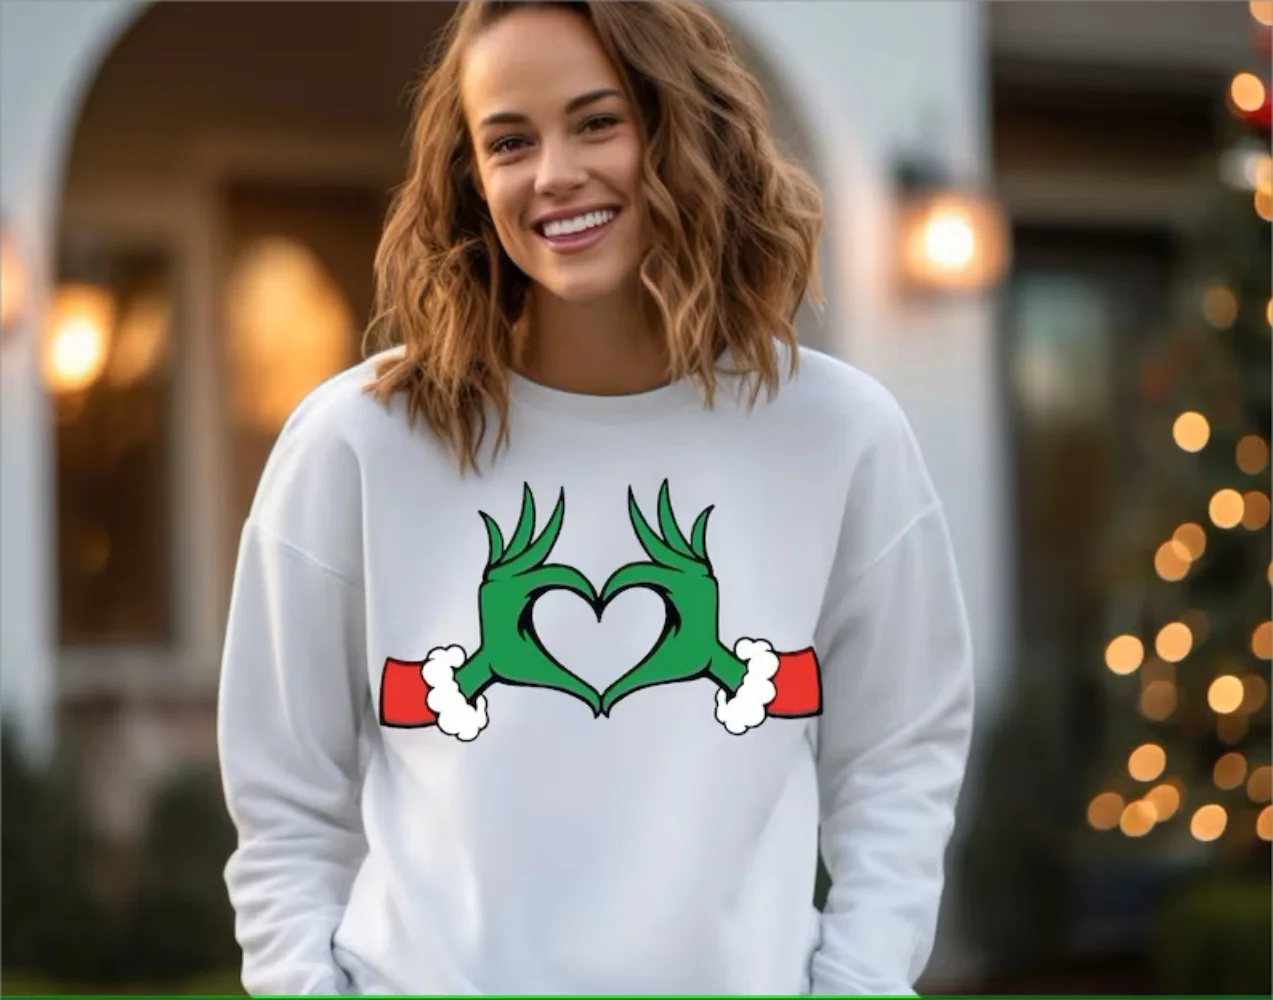 Trending Now Heart Hands Graphic Christmas Shirt Cute Funny Love Graphic Tees Matching Family Sweatshirt Xmas Holiday T-Shirt t shirts tees splicing leopard christmas tree t shirt tee in pink size 2xl